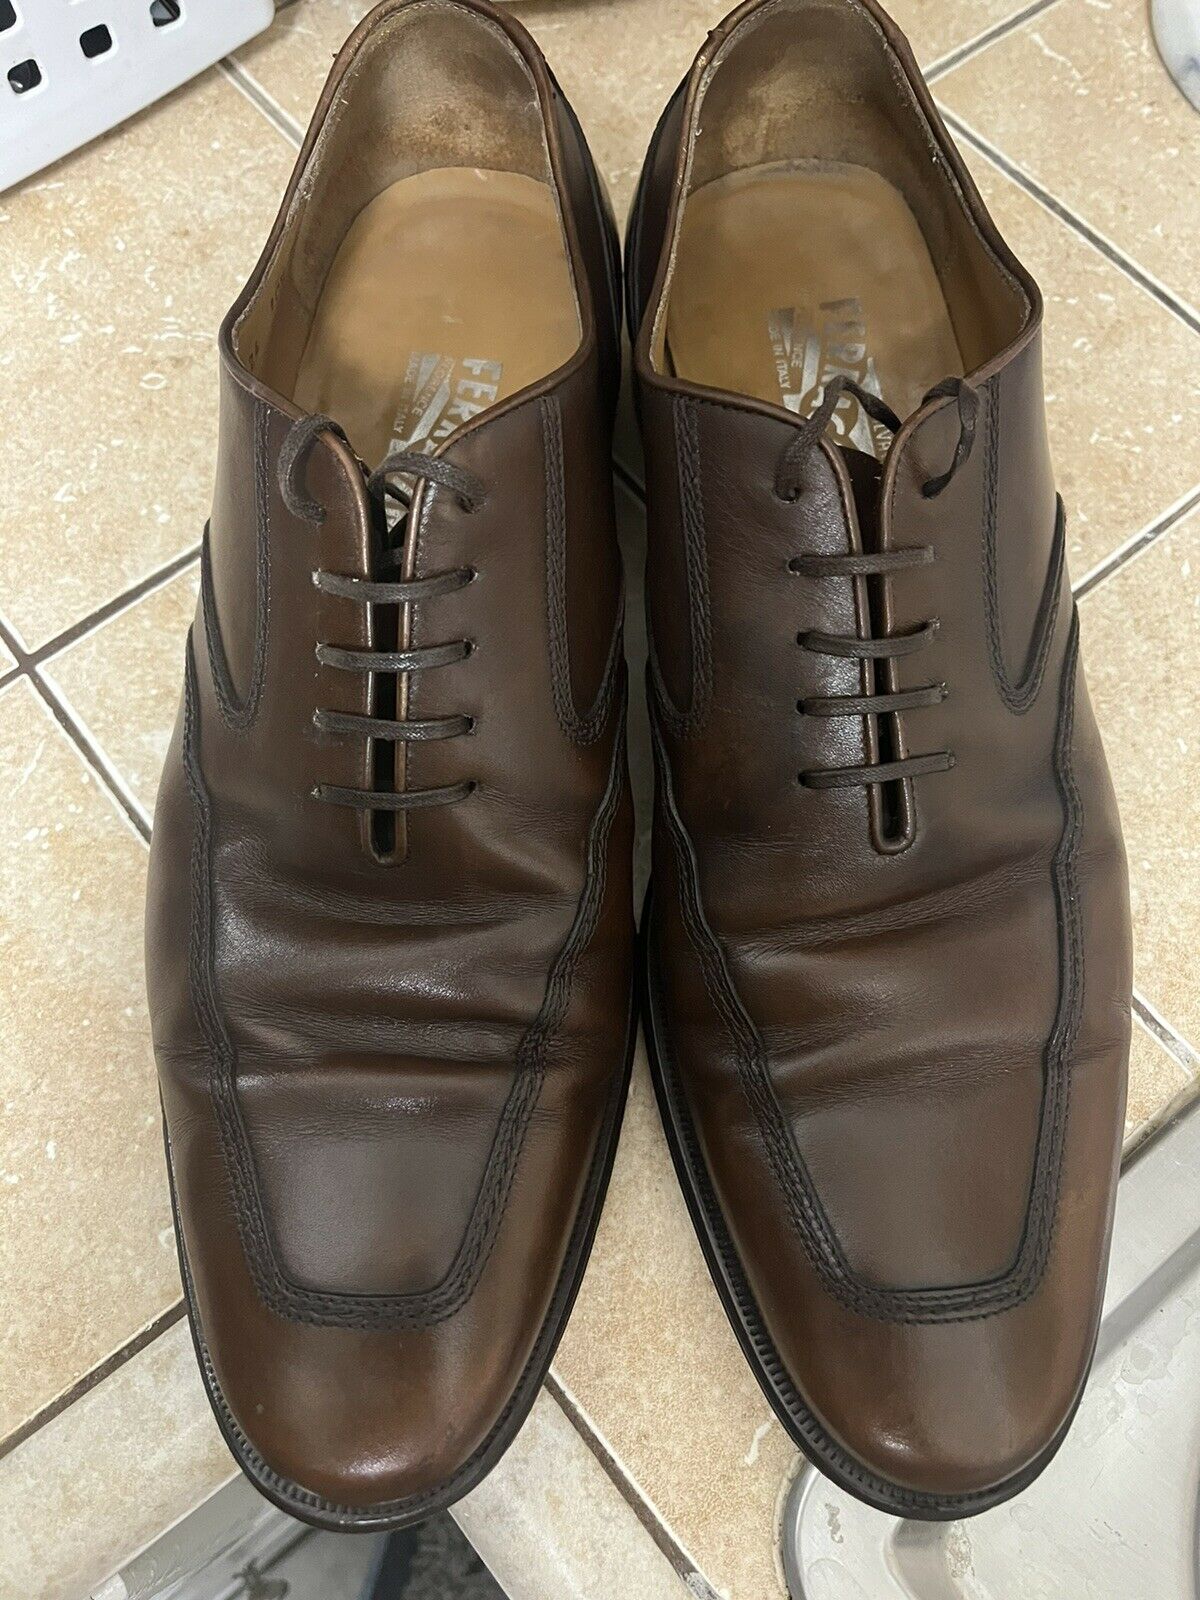 Salvatore Ferragamo Men’s Brown Leather Dress Shoes 10.5 2E Polished Made Italy